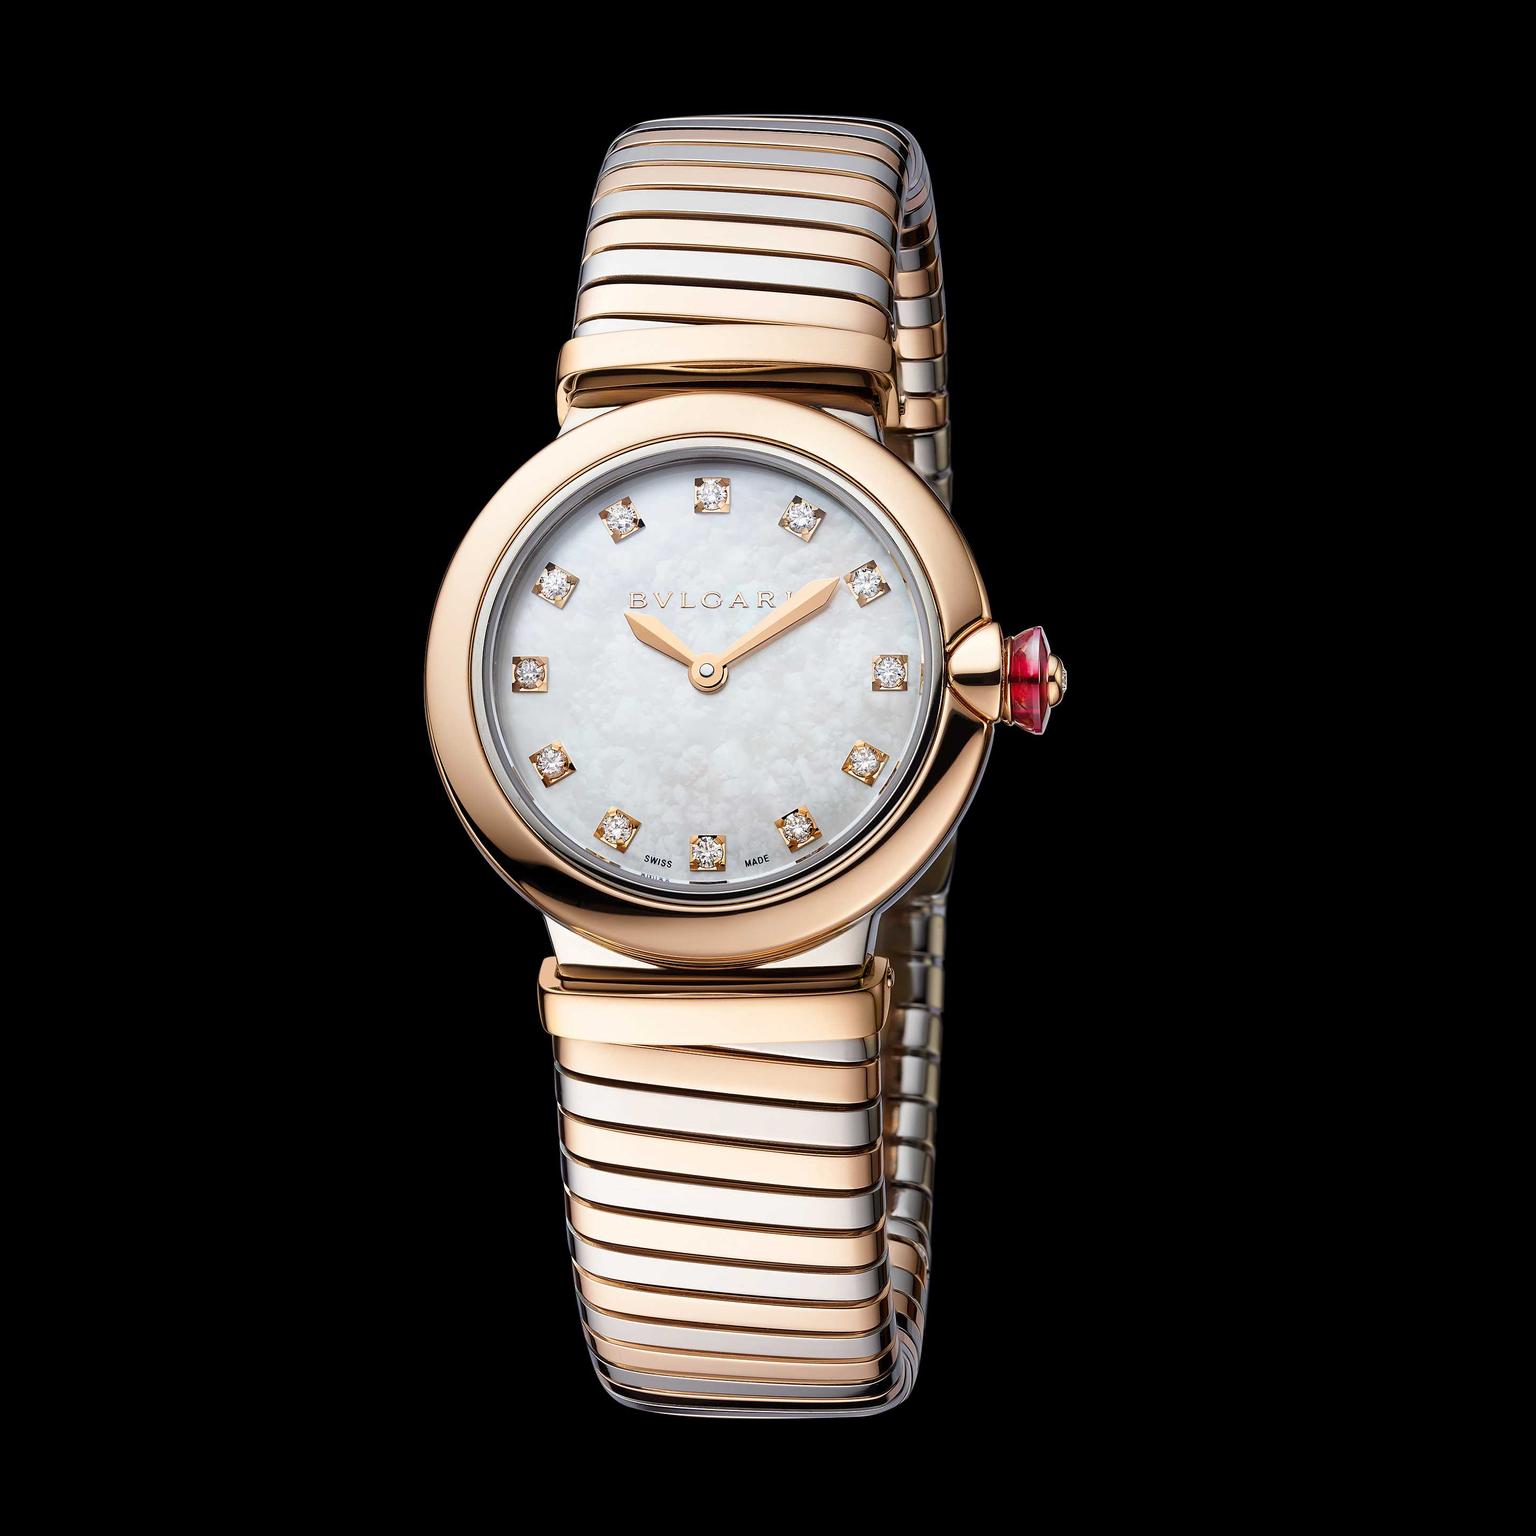 Bulgari Lvcea Tubogas 28mm rose gold and stainless steel women’s watch 2018 Price:€9,300